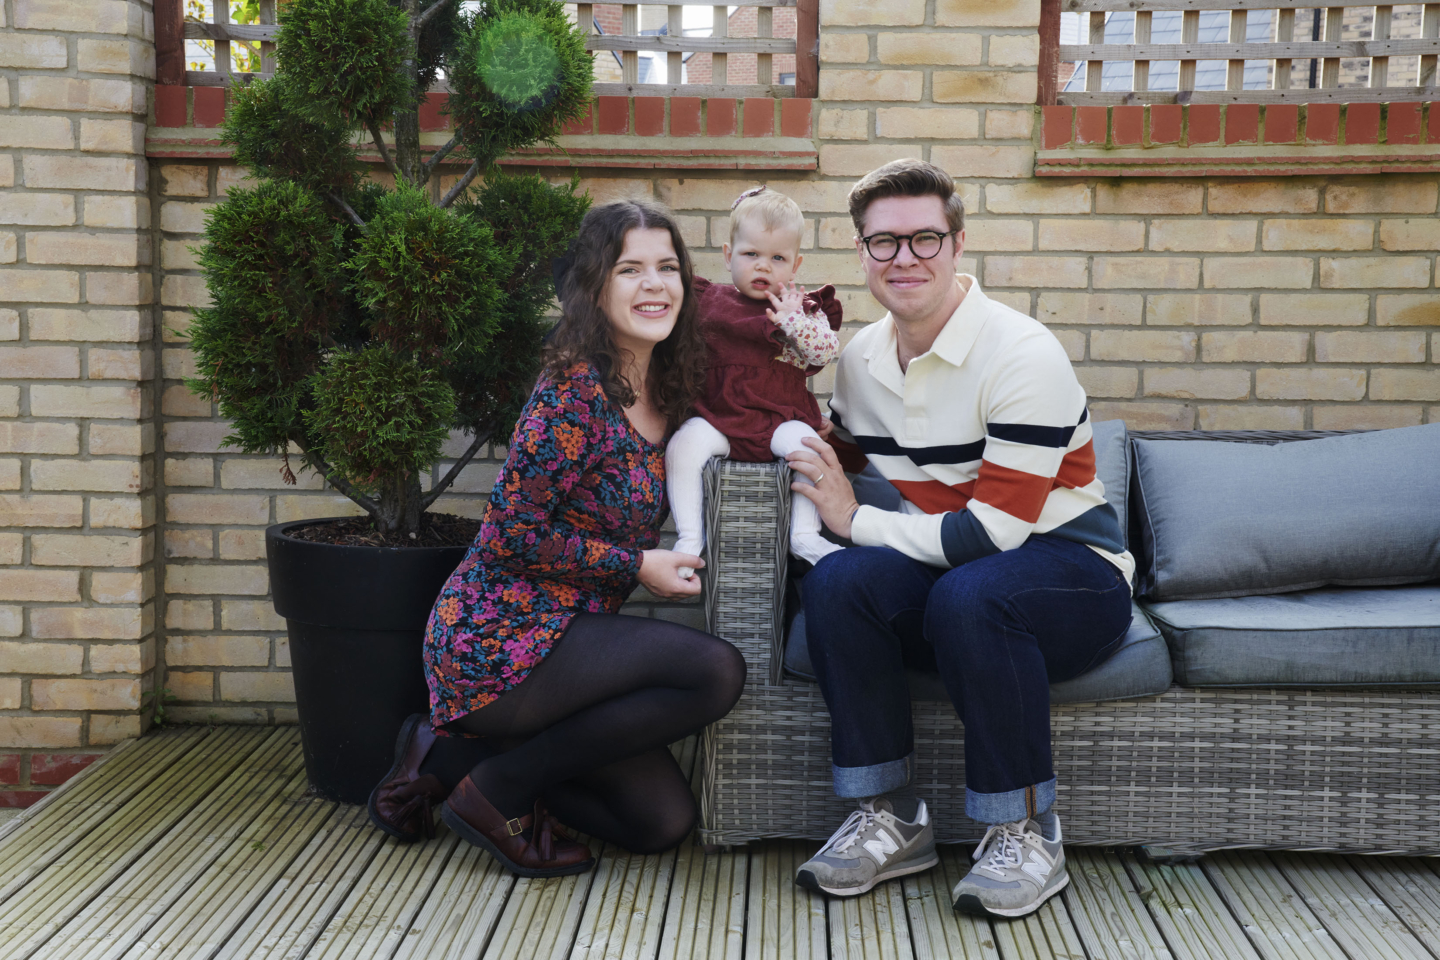 A couple and a baby sitting on outdoor furniture